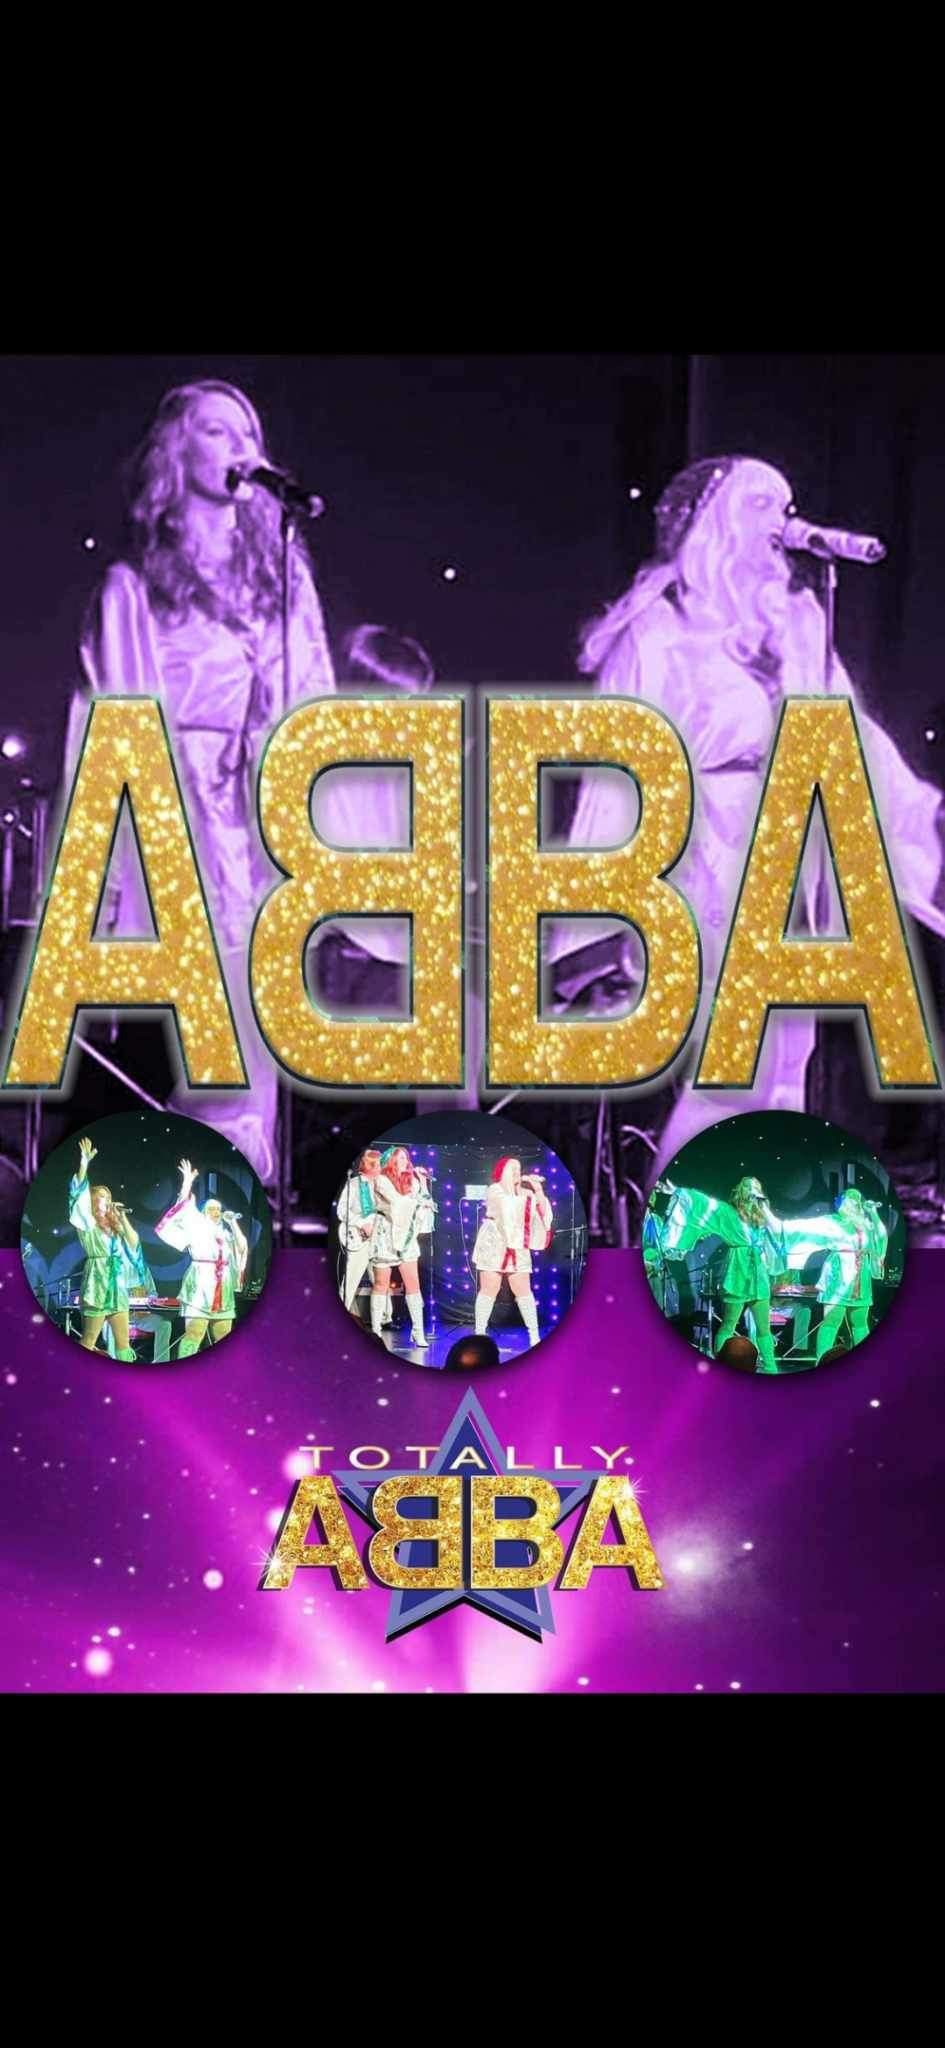 Totally ABBA Duo  on Jun 15, 19:30@Benwick village hall - Buy tickets and Get information on whittlesey music nights 